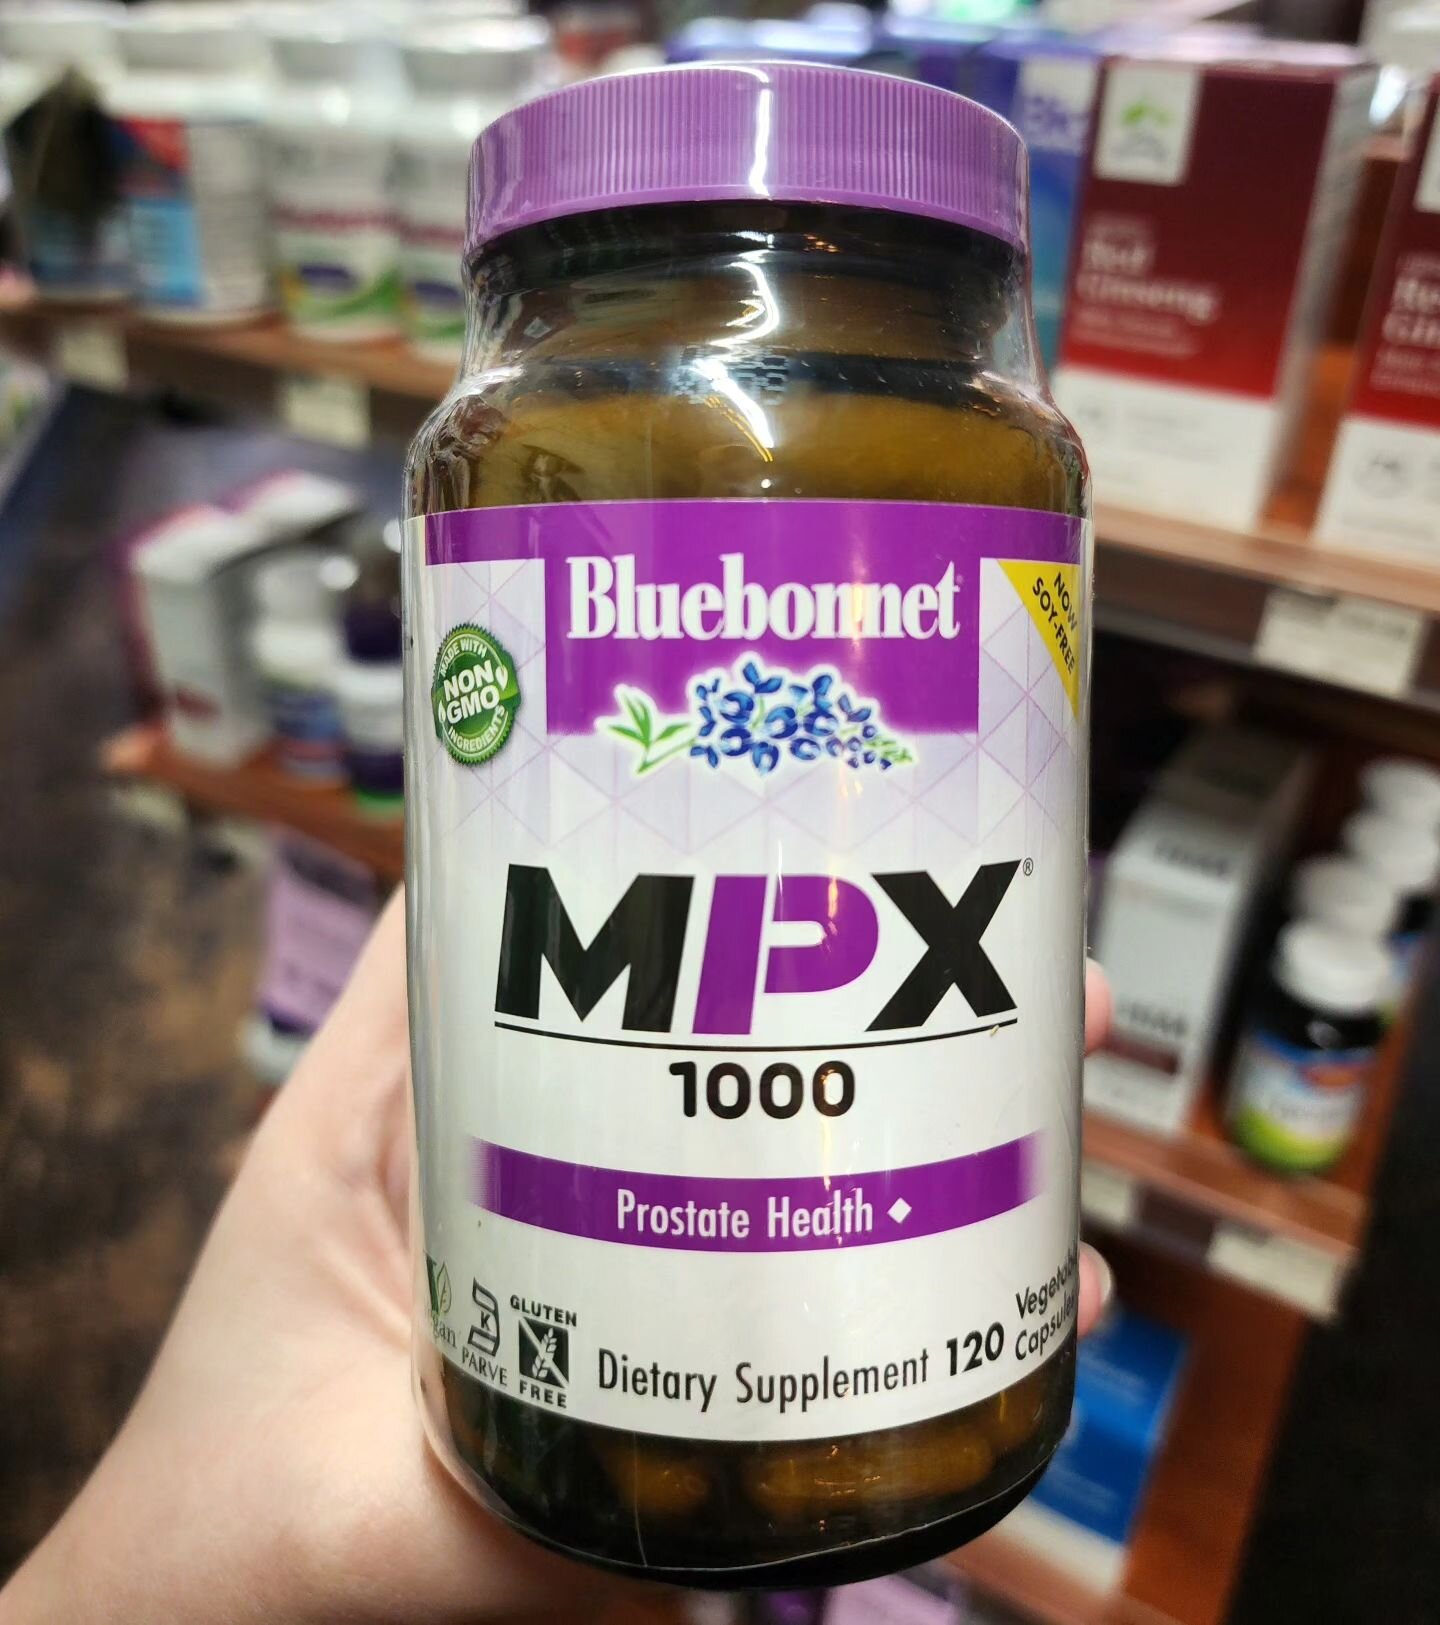 💥Doctor reccomended and customer favorite!💥

Bluebonnet&rsquo;s MPX 1000&reg; Prostate Support Vcaps are scientifically formulated with innovative and complementary nutrients to support men&rsquo;s prostate health, such as standardized saw palmetto